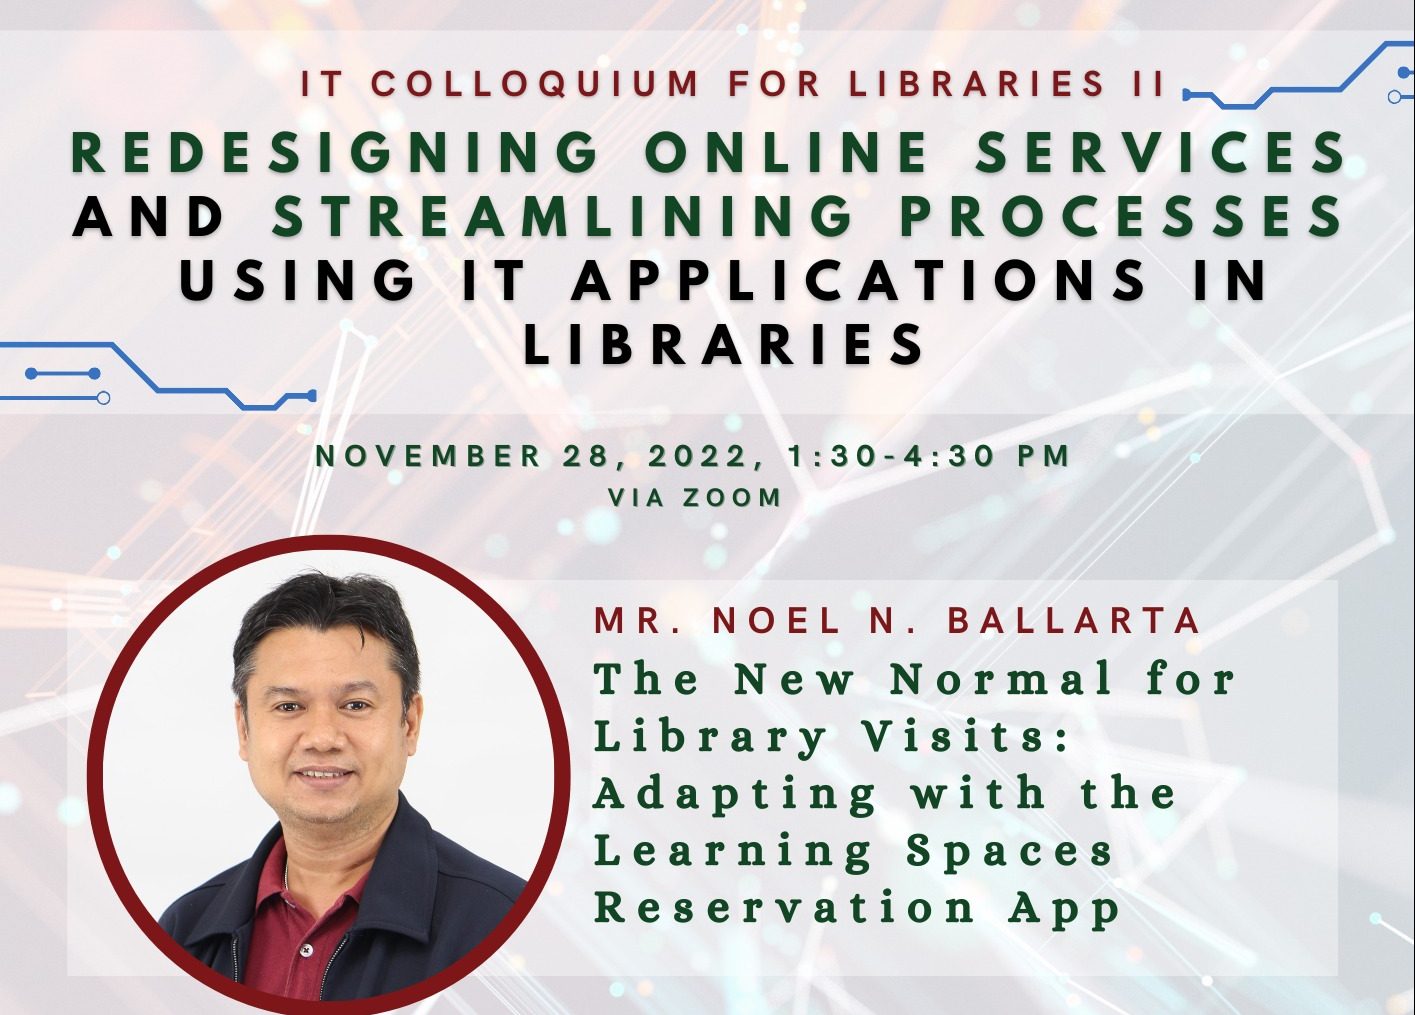 IT Colloquium for Libraries 2022: Redesigning Online Services and Streamlining Processes using IT Applications in Libraries